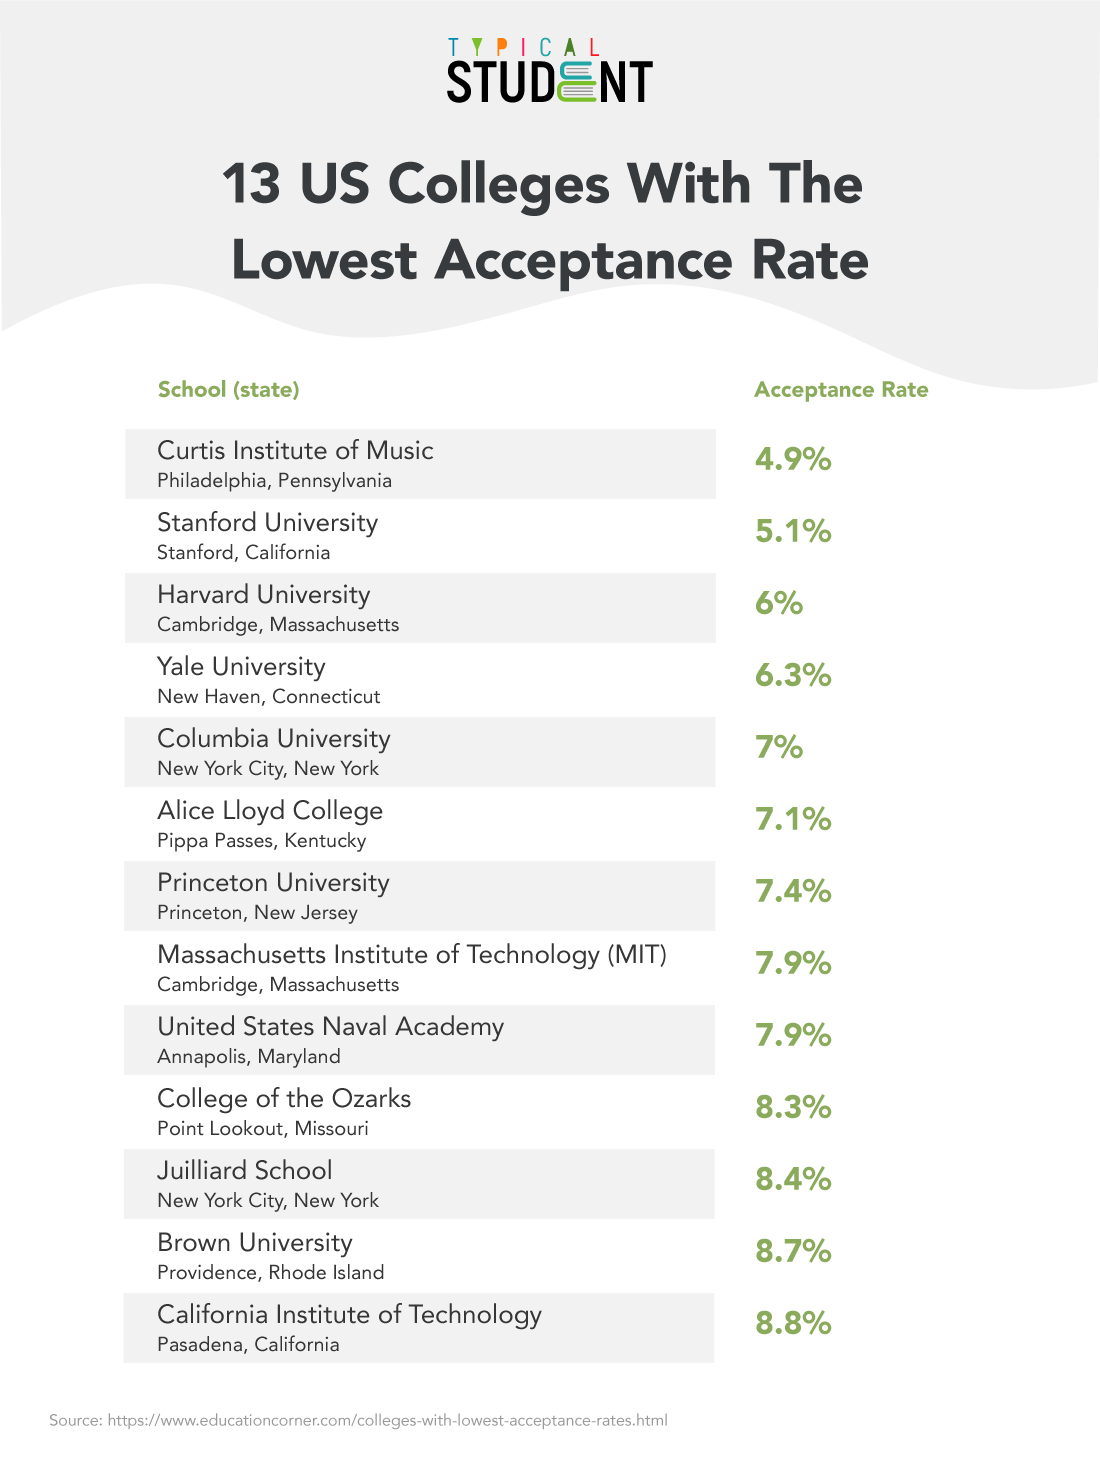 13 US Colleges With The Lowest Acceptance Rate